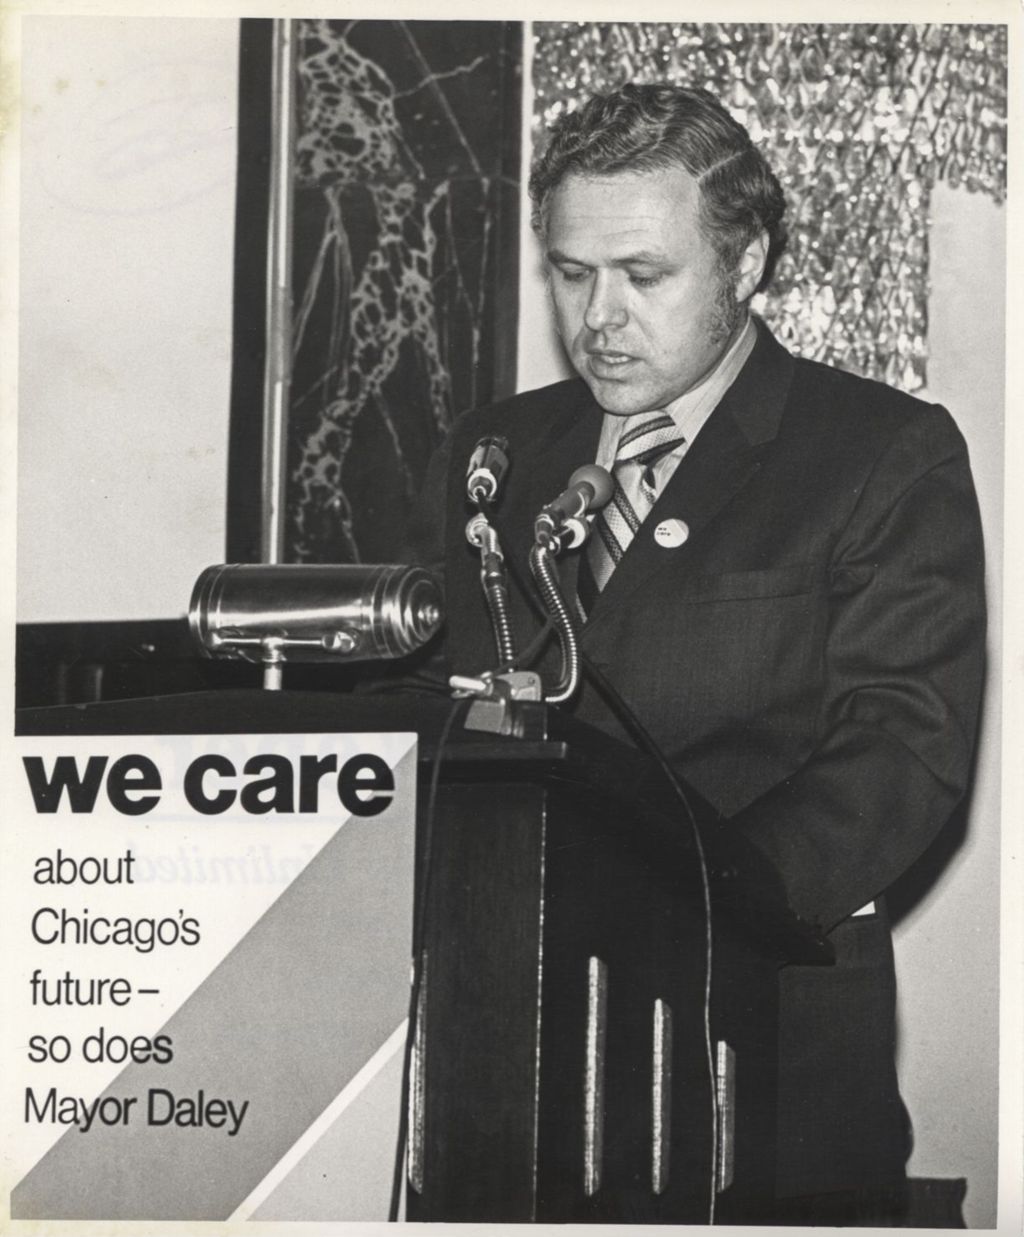 Man speaking at a "We Care" event